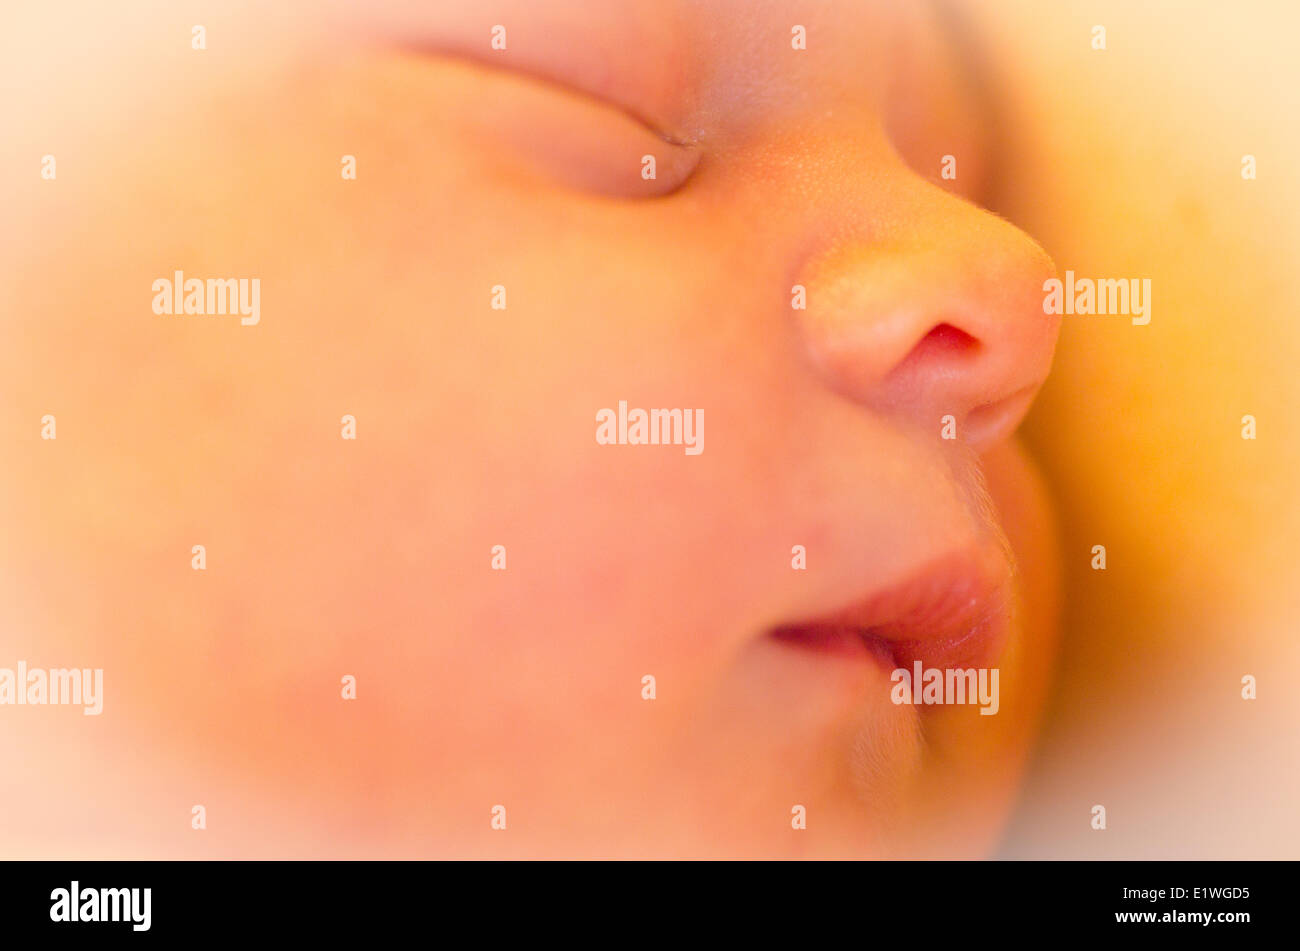 A one-day old newborn baby is fresh out of the womb and sleeping Stock Photo